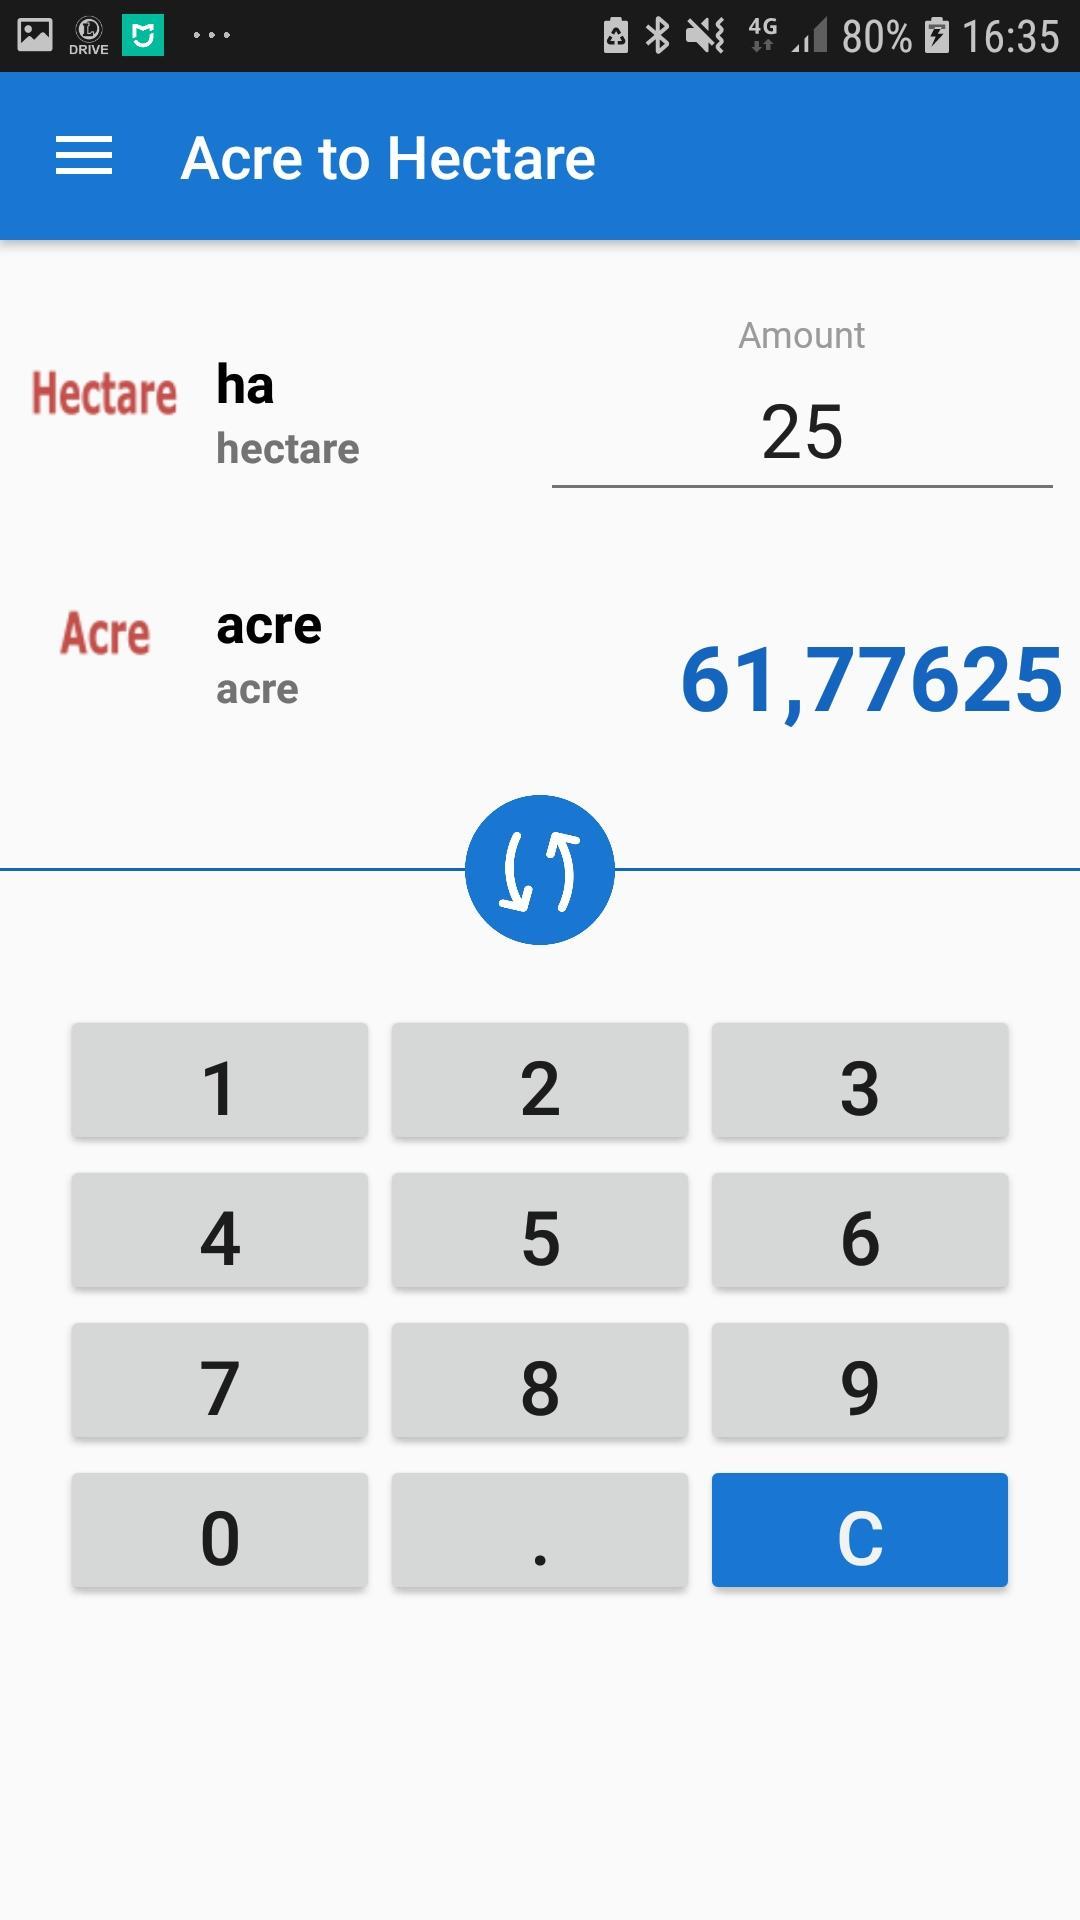 hectare to acre converter for Android - APK Download